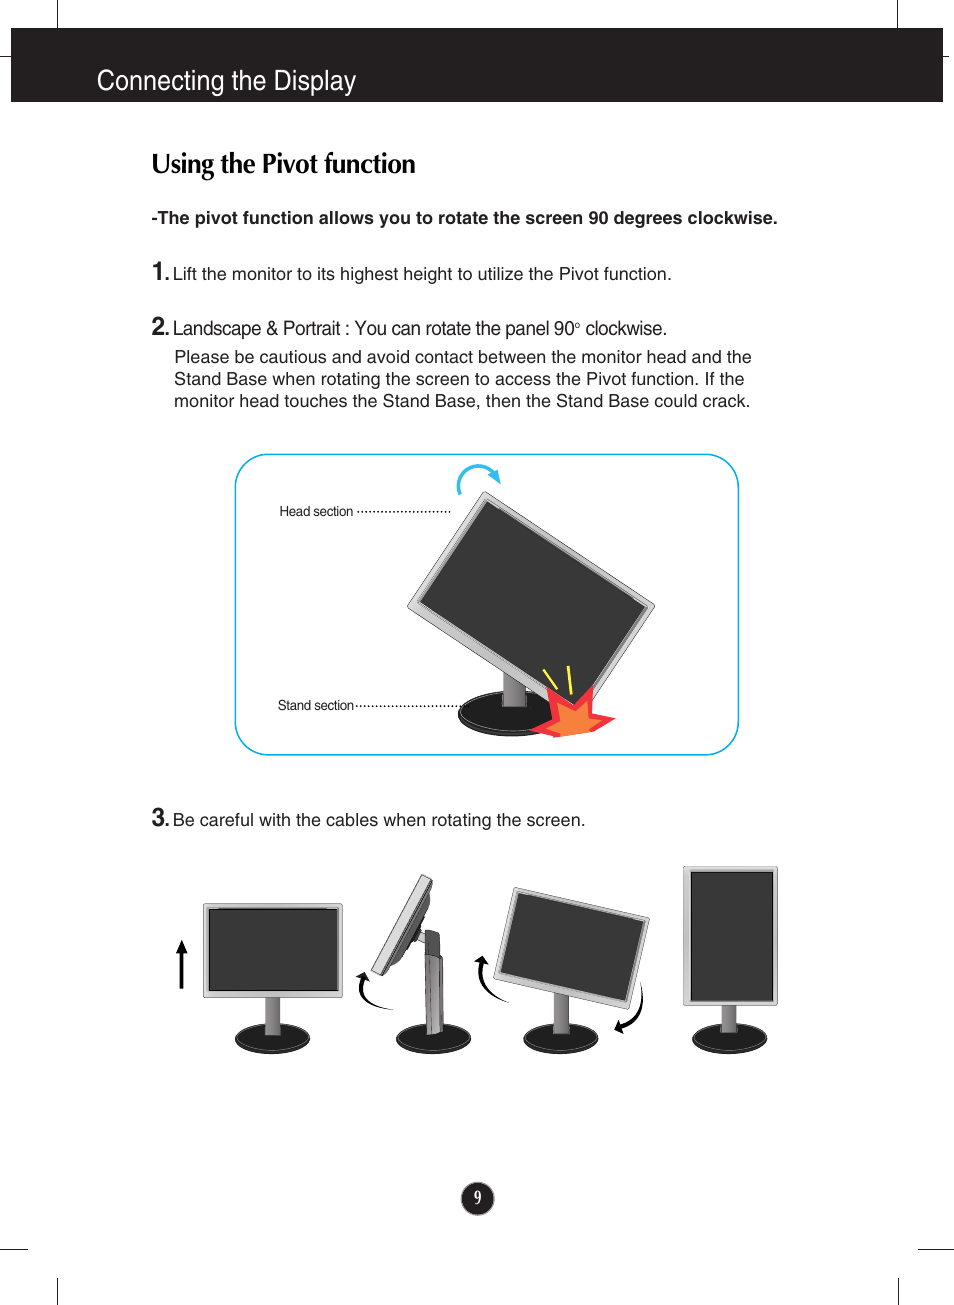 Using the pivot function, Connecting the display | LG lcd monitor ips231p User Manual | Page 10 / 31